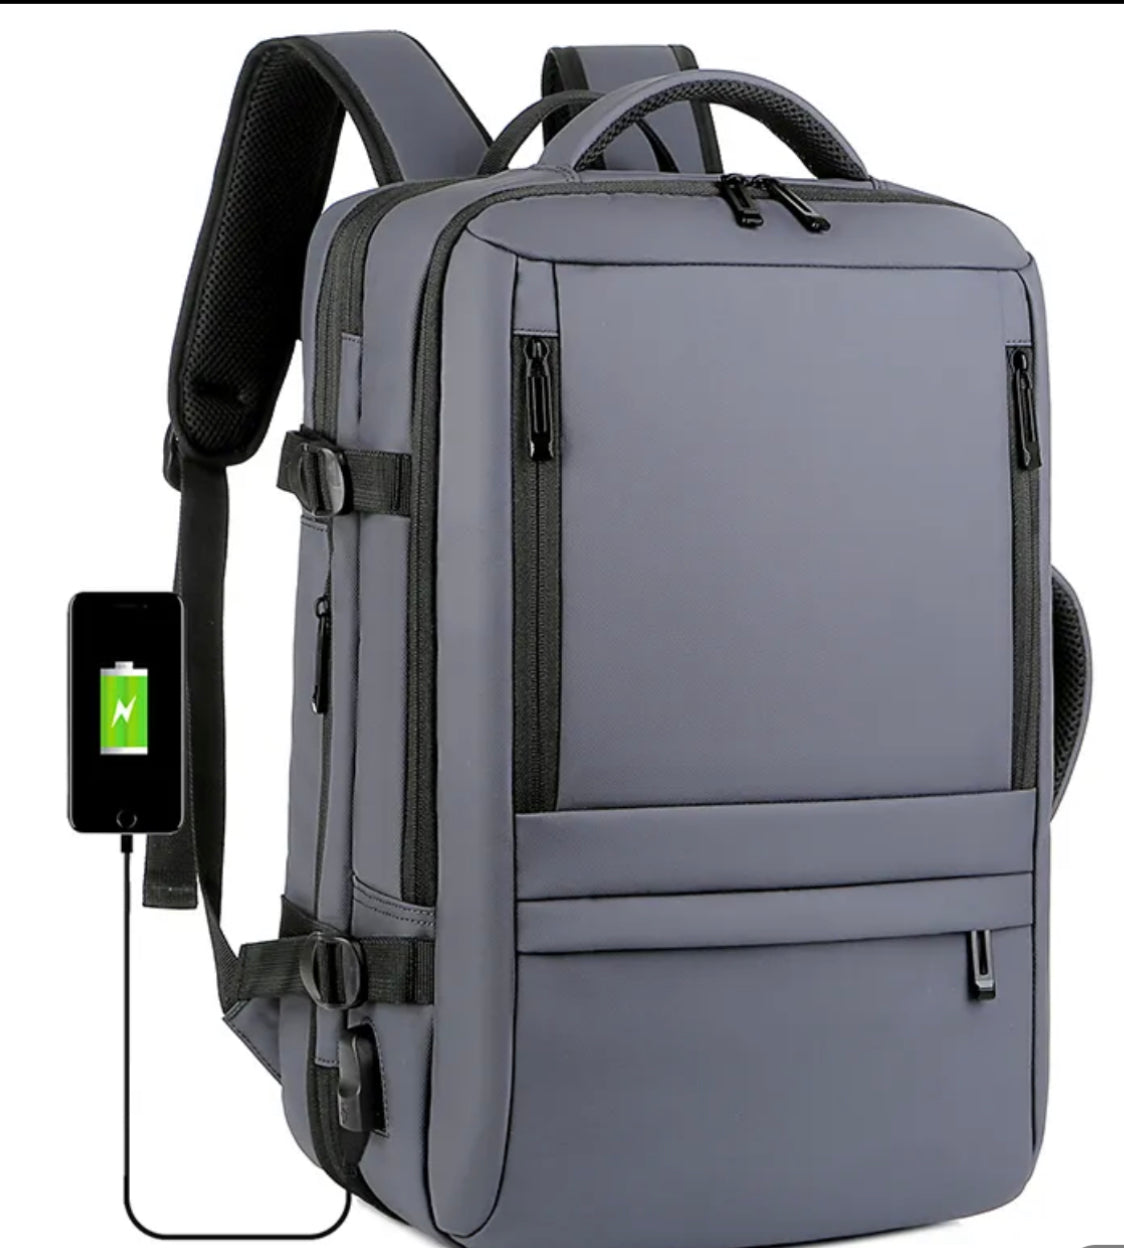 Large Capacity Travel Bag with USB charging port - ExistTravels